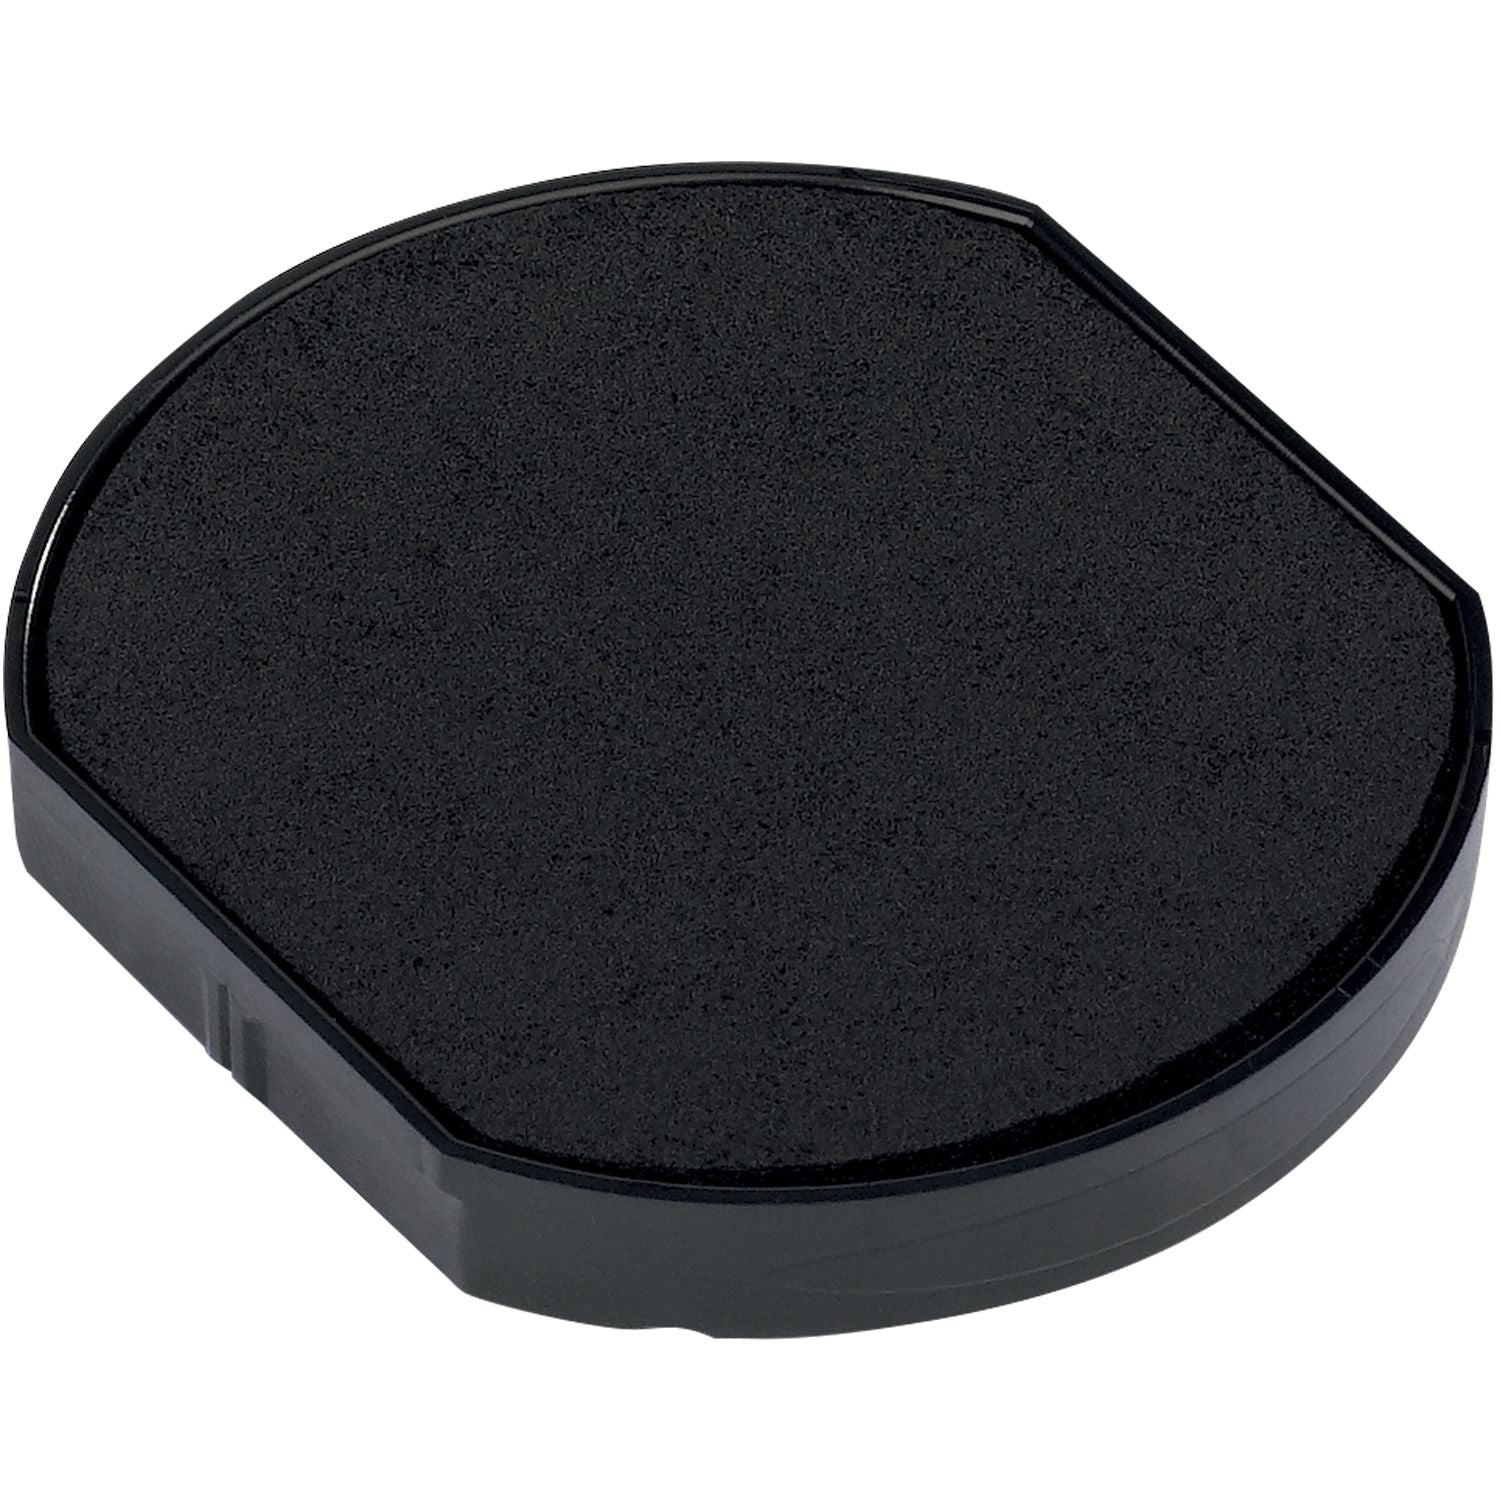 One Color Replacement Ink Pad For 46130 Trodat Black